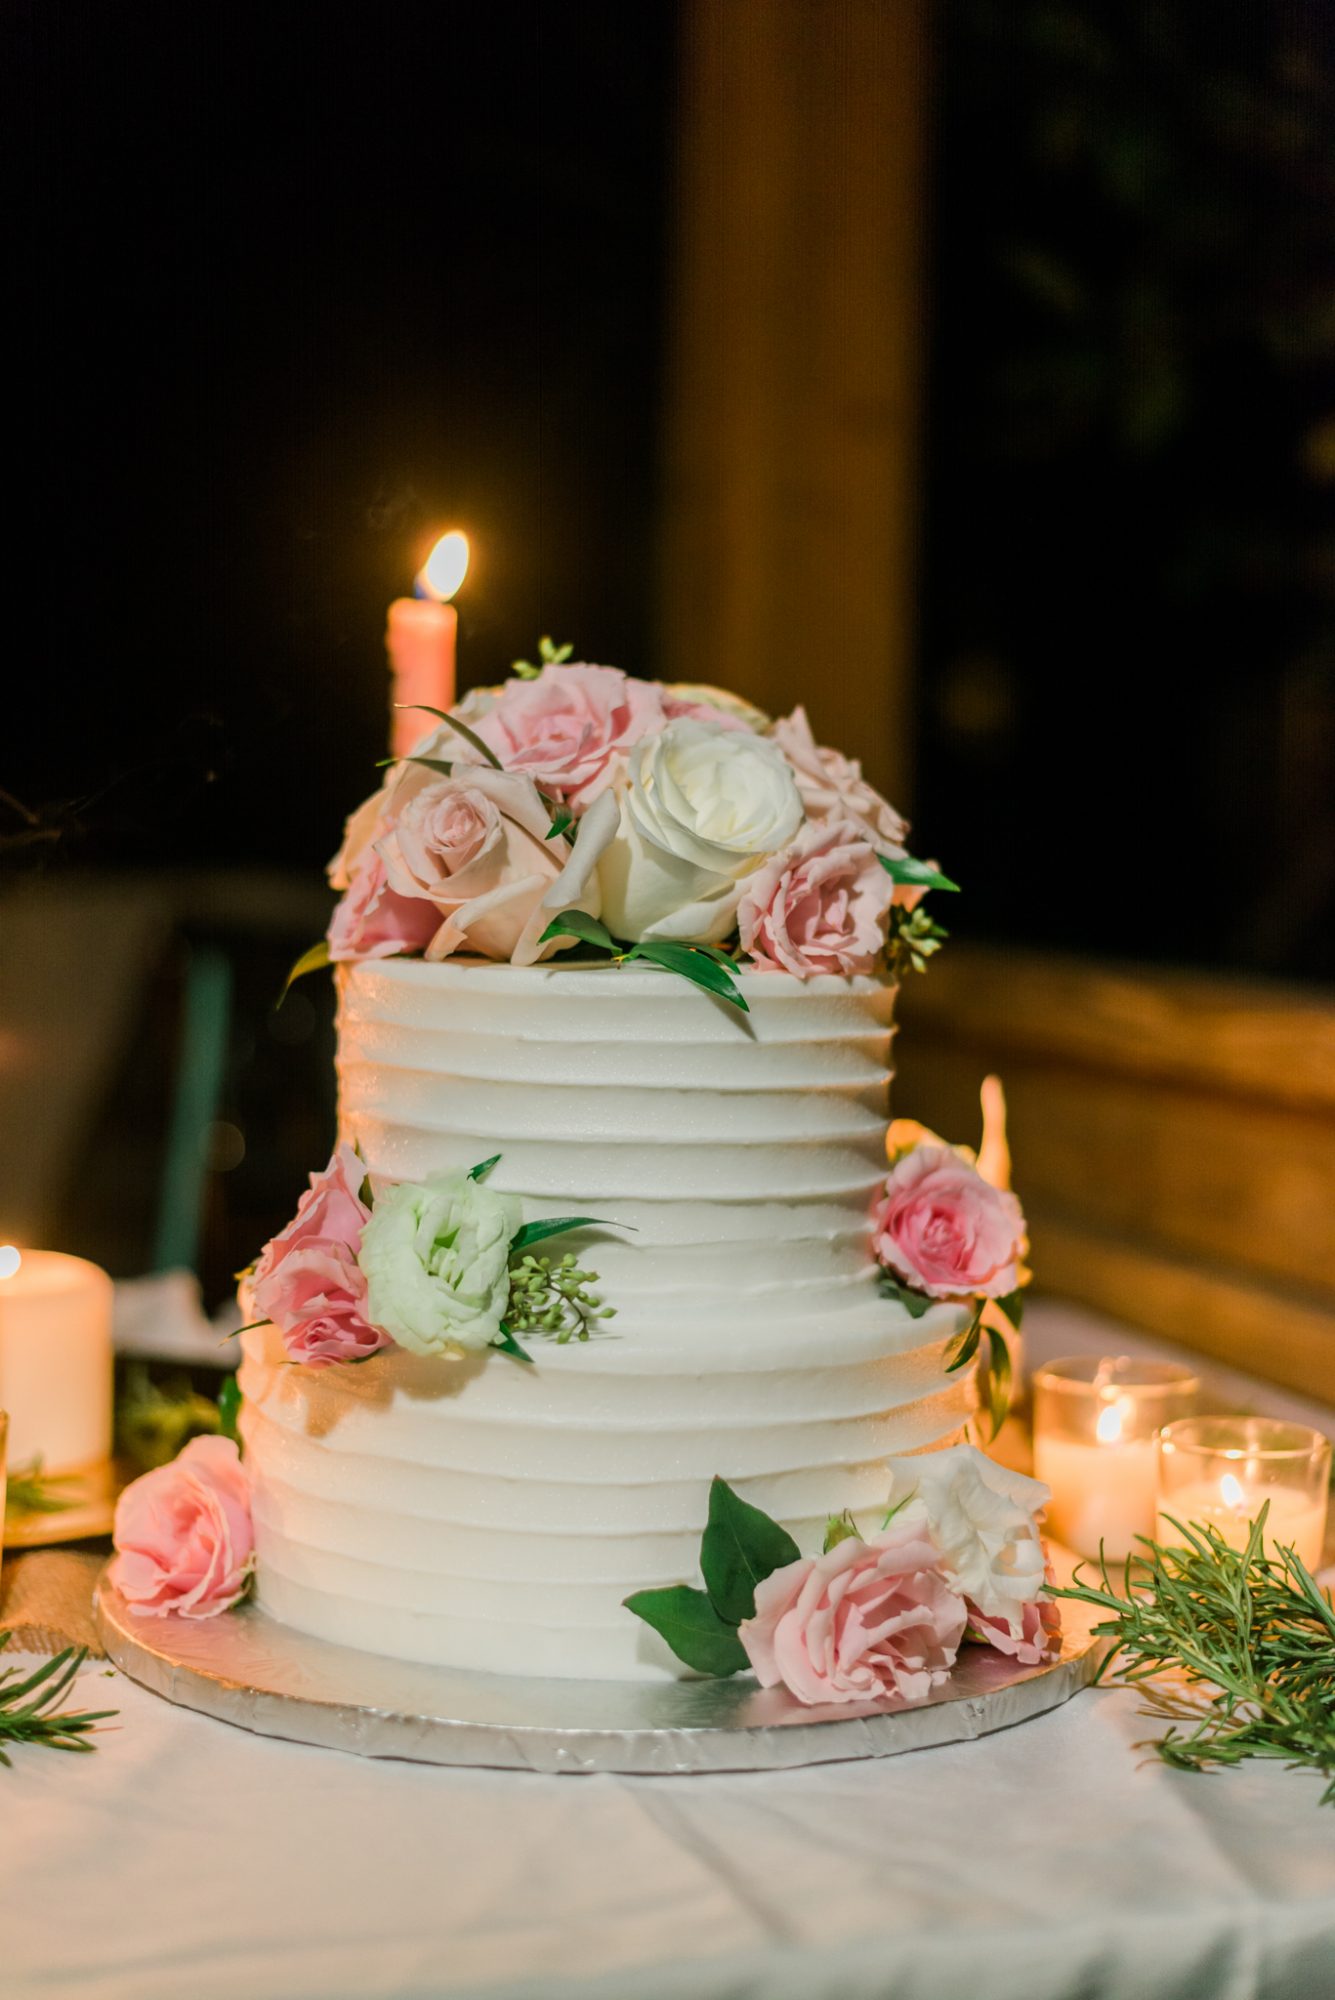 A sailing themed wedding cake with pink and white flowers on top, perfect for a Key West wedding.